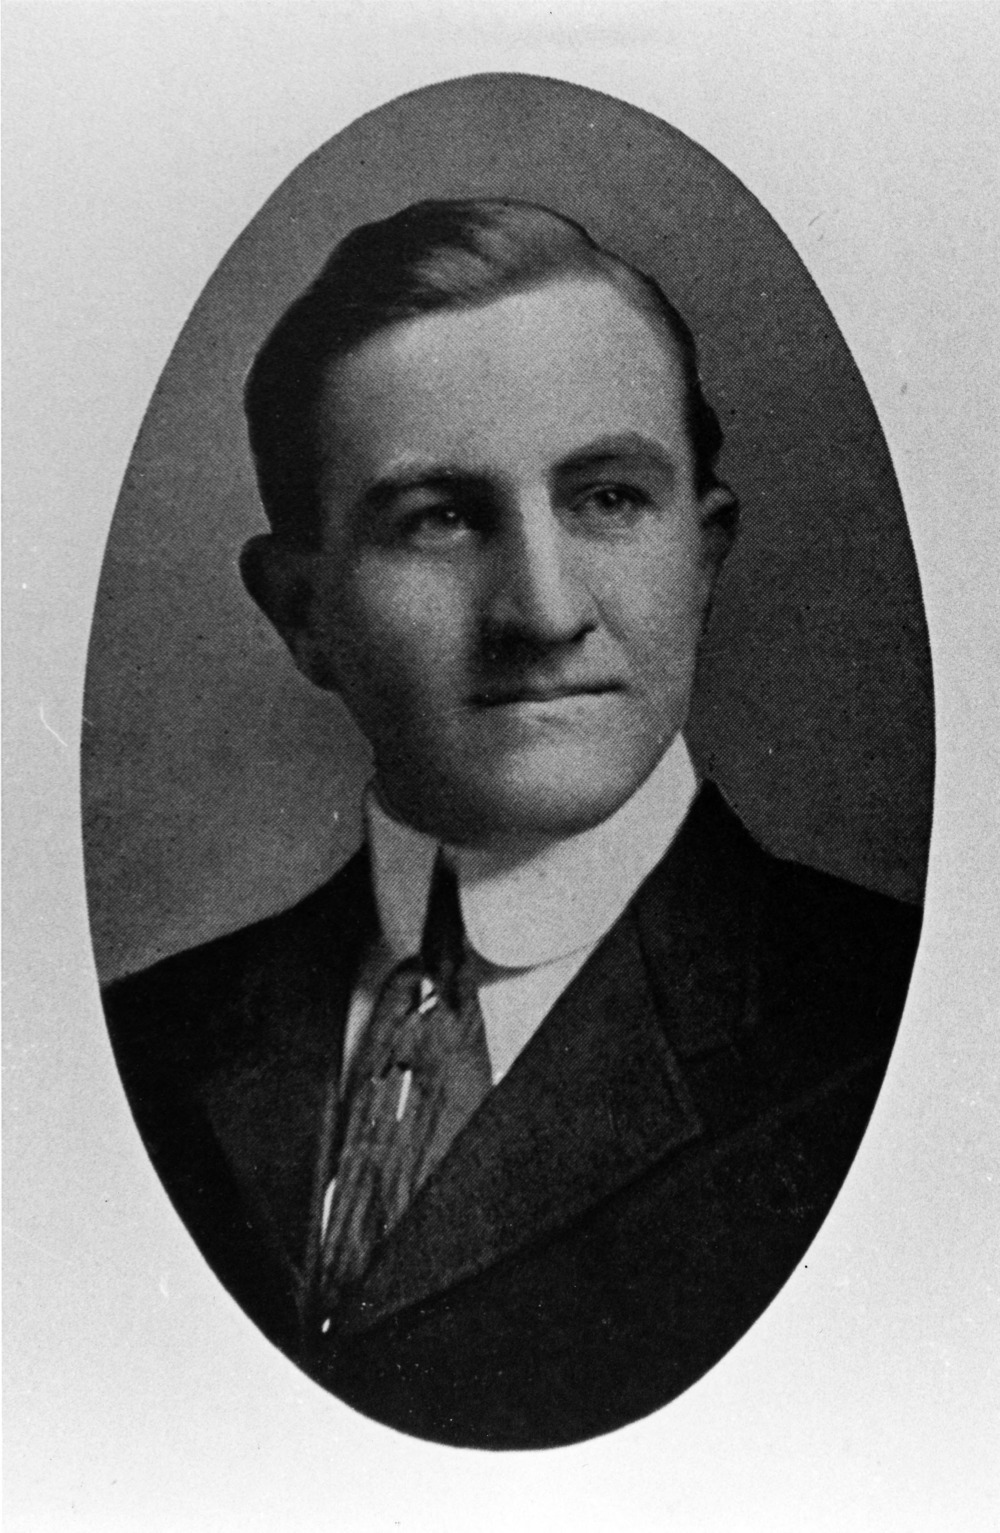 Black and white portrait of Frank Thompson from the 1909 Agromeck.